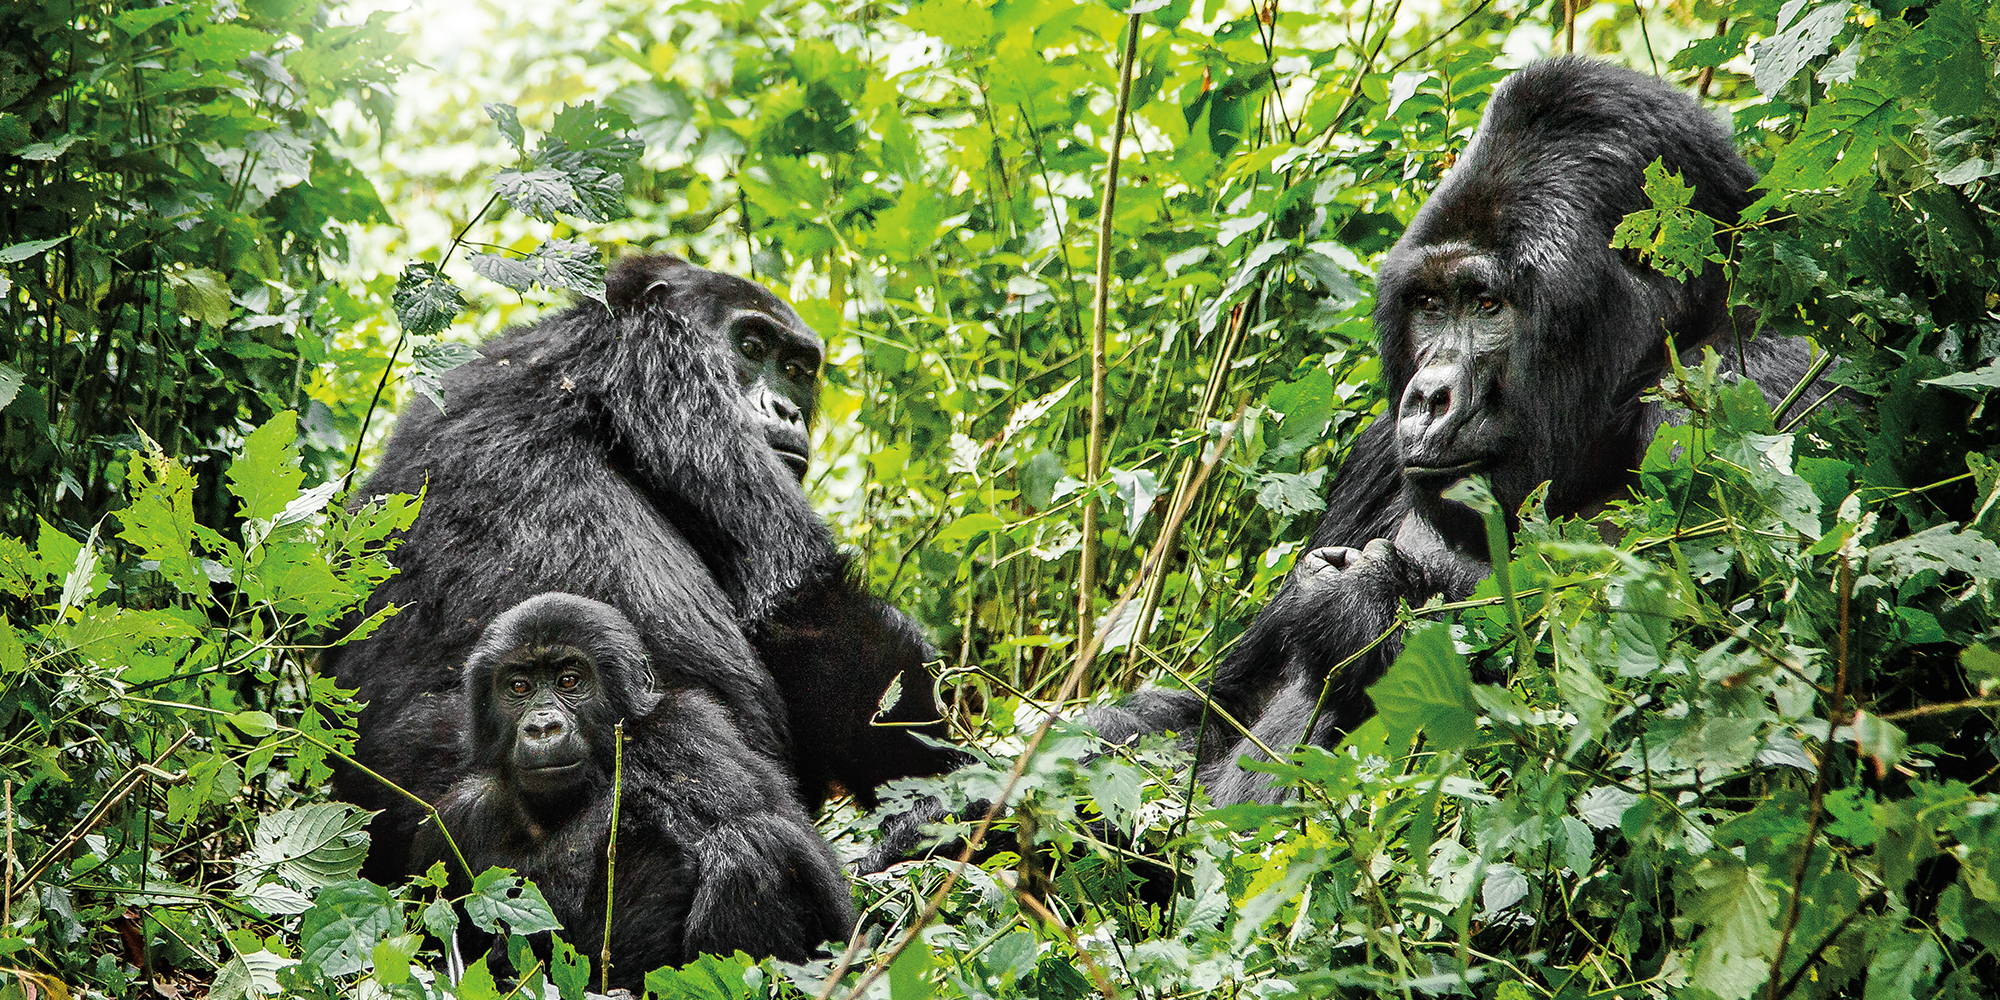 Important Things To Know To Prepare For Gorilla Trekking In Uganda